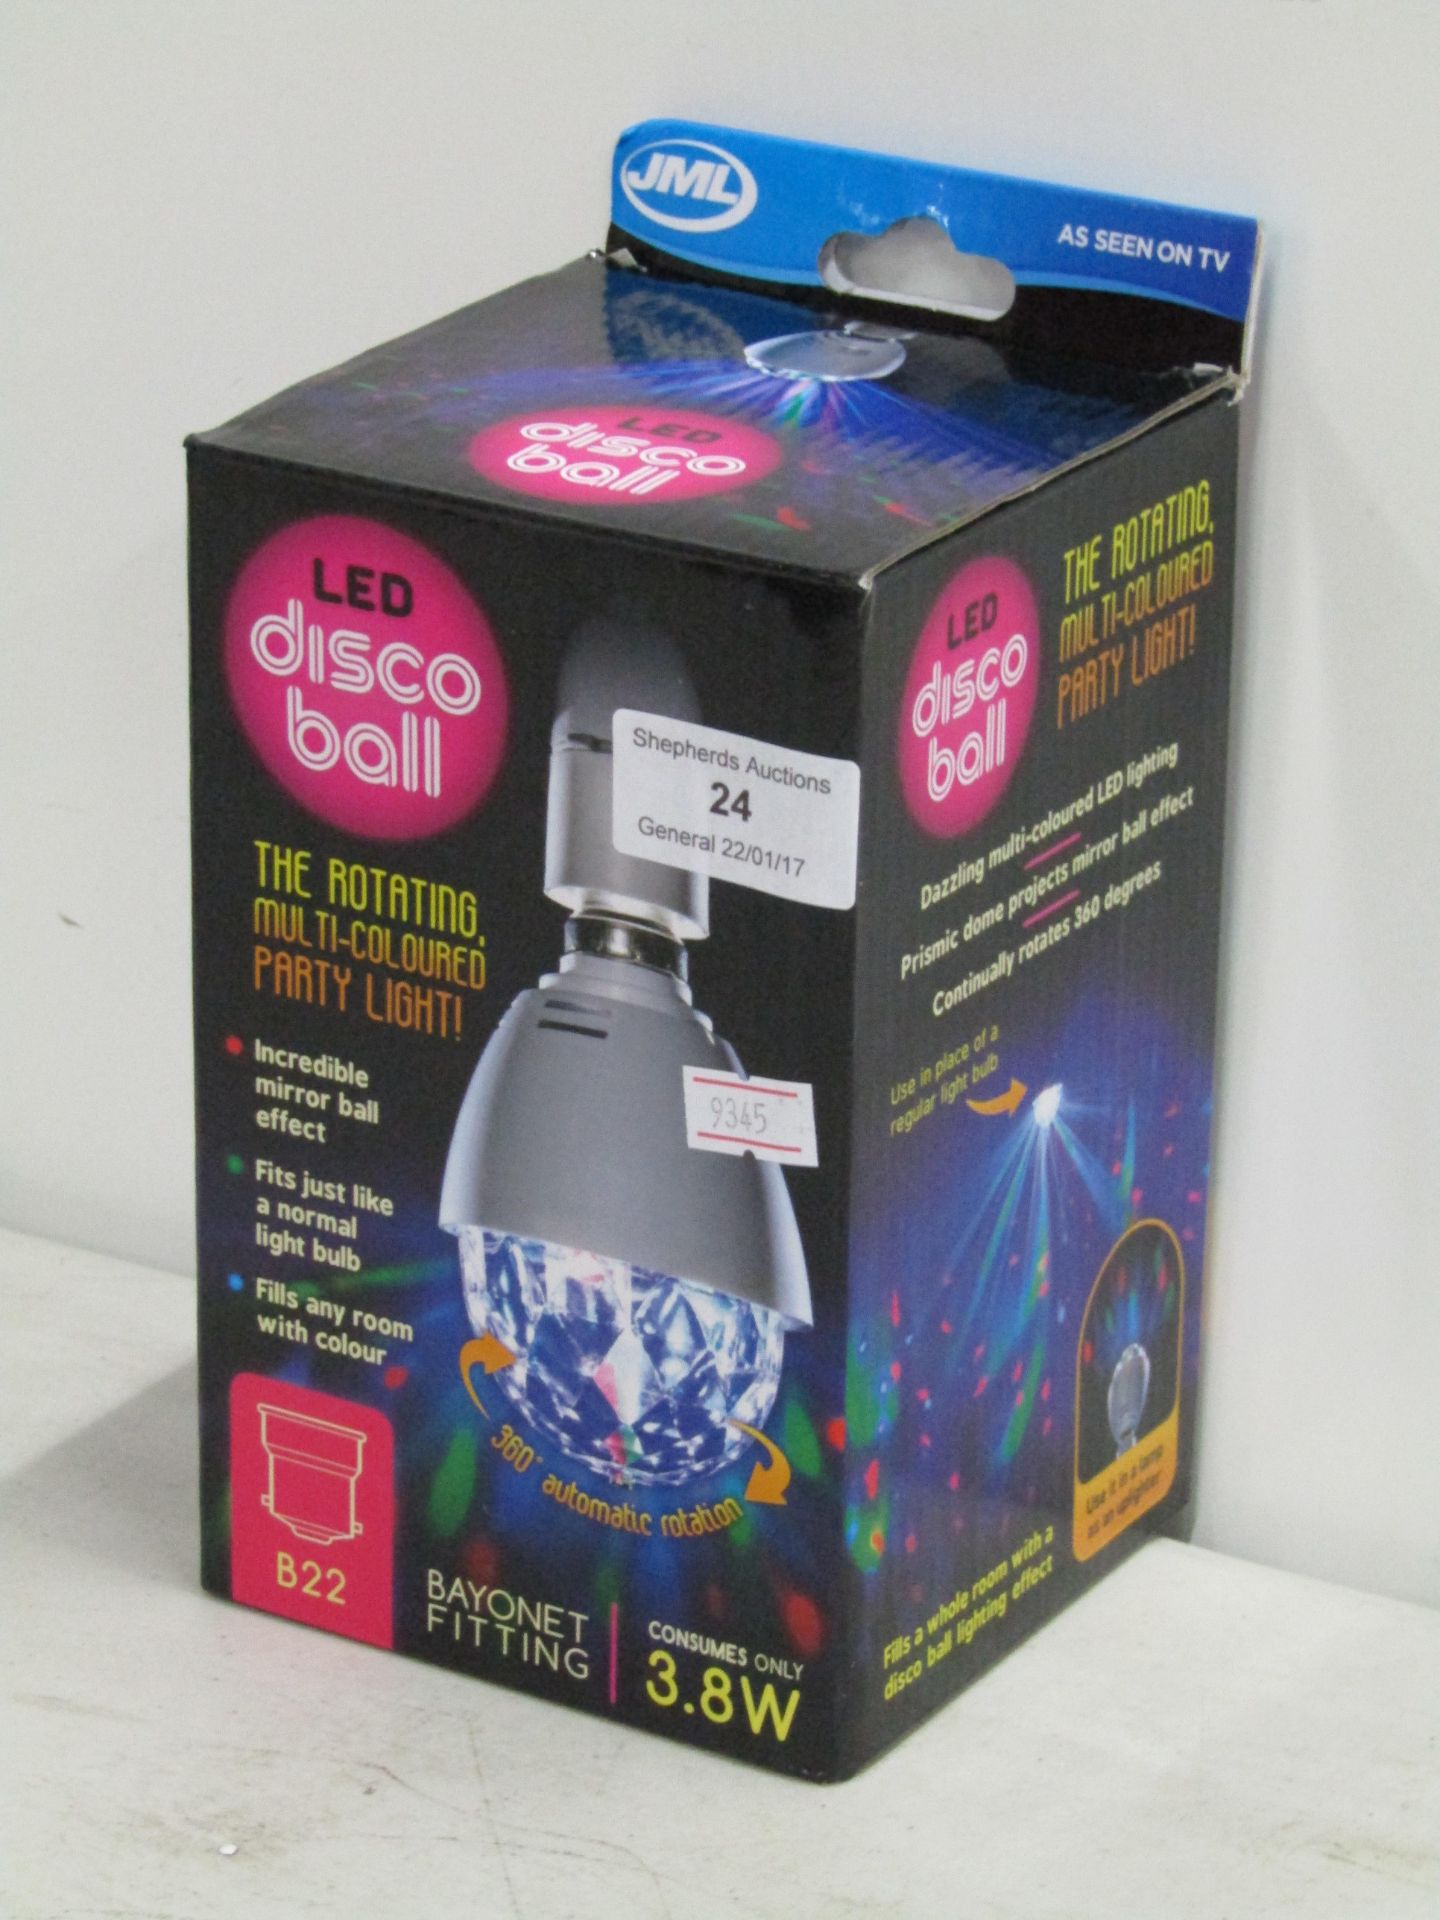 LED Multi-coloured disco ball, unchecked and boxed.